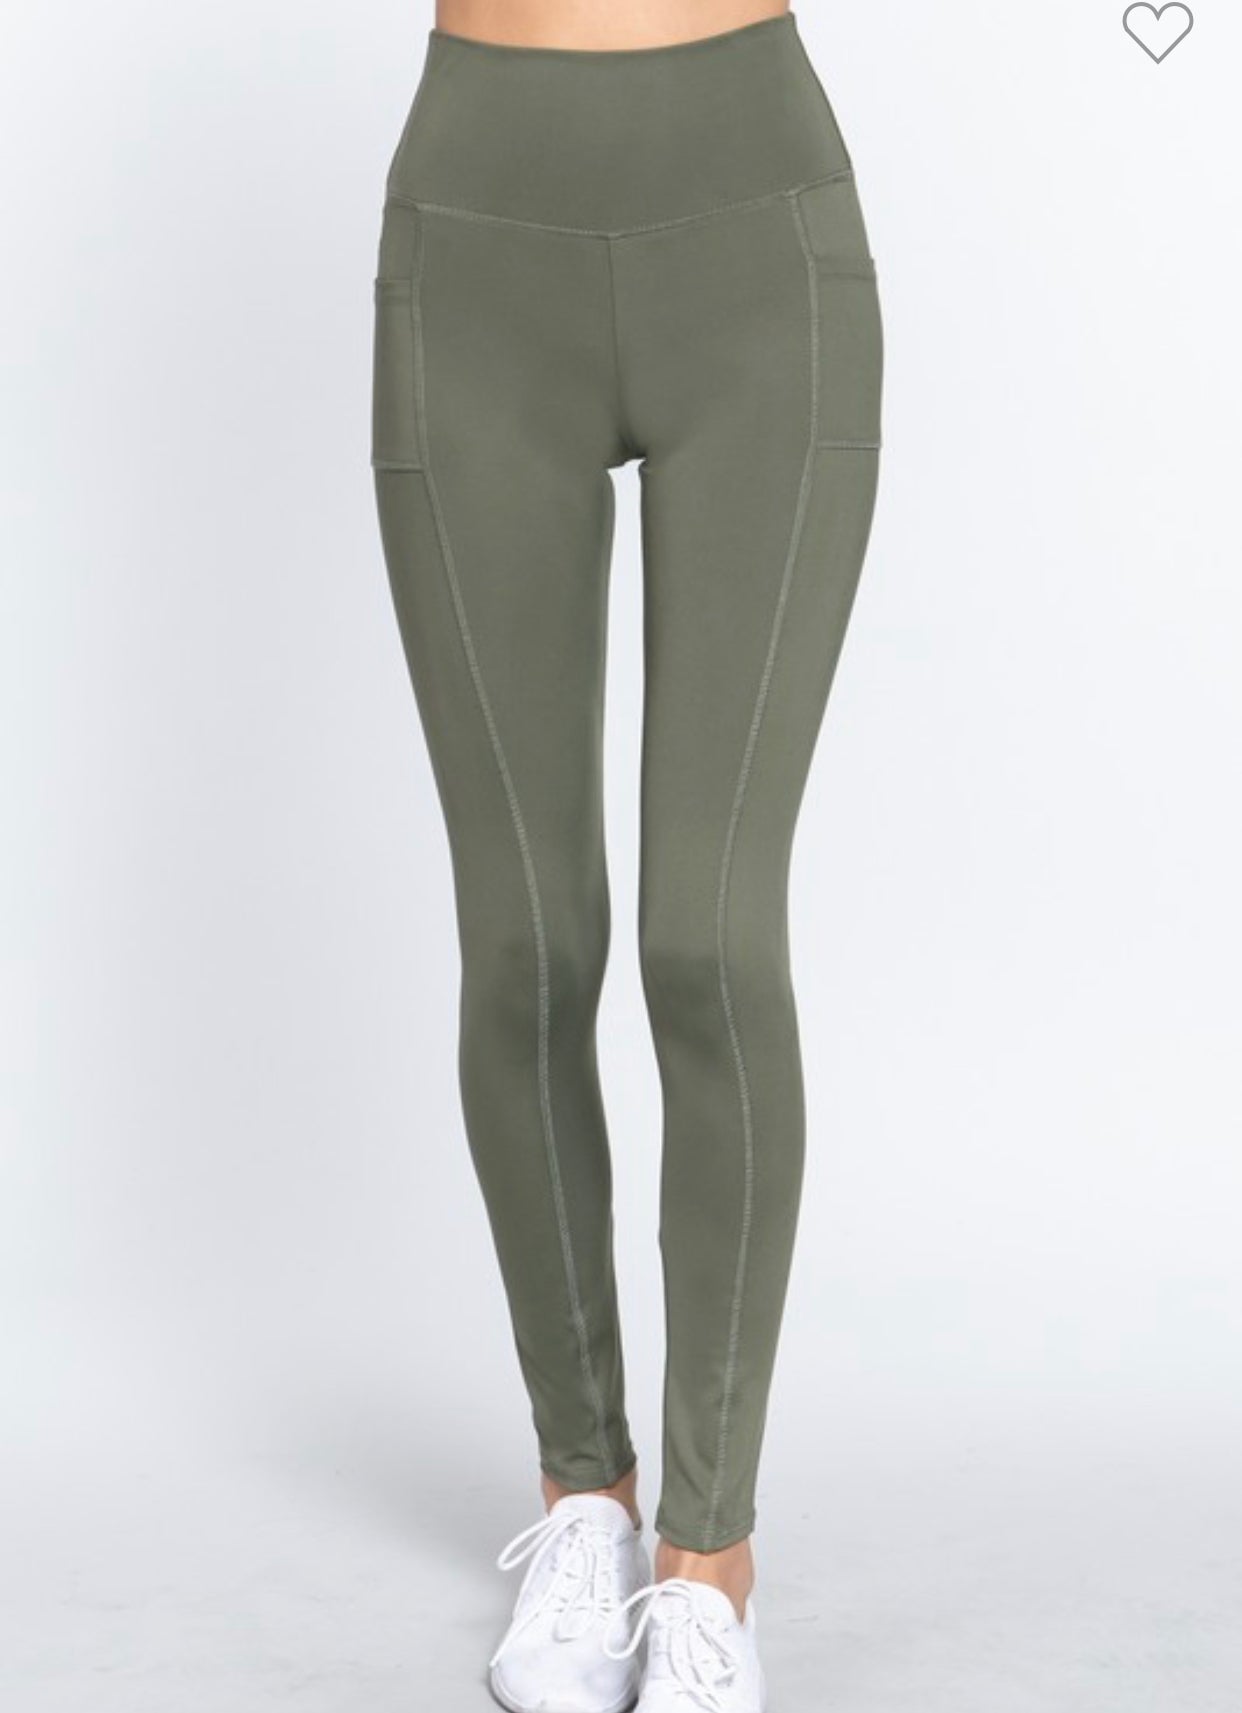 Olive Cassie leggings with pockets